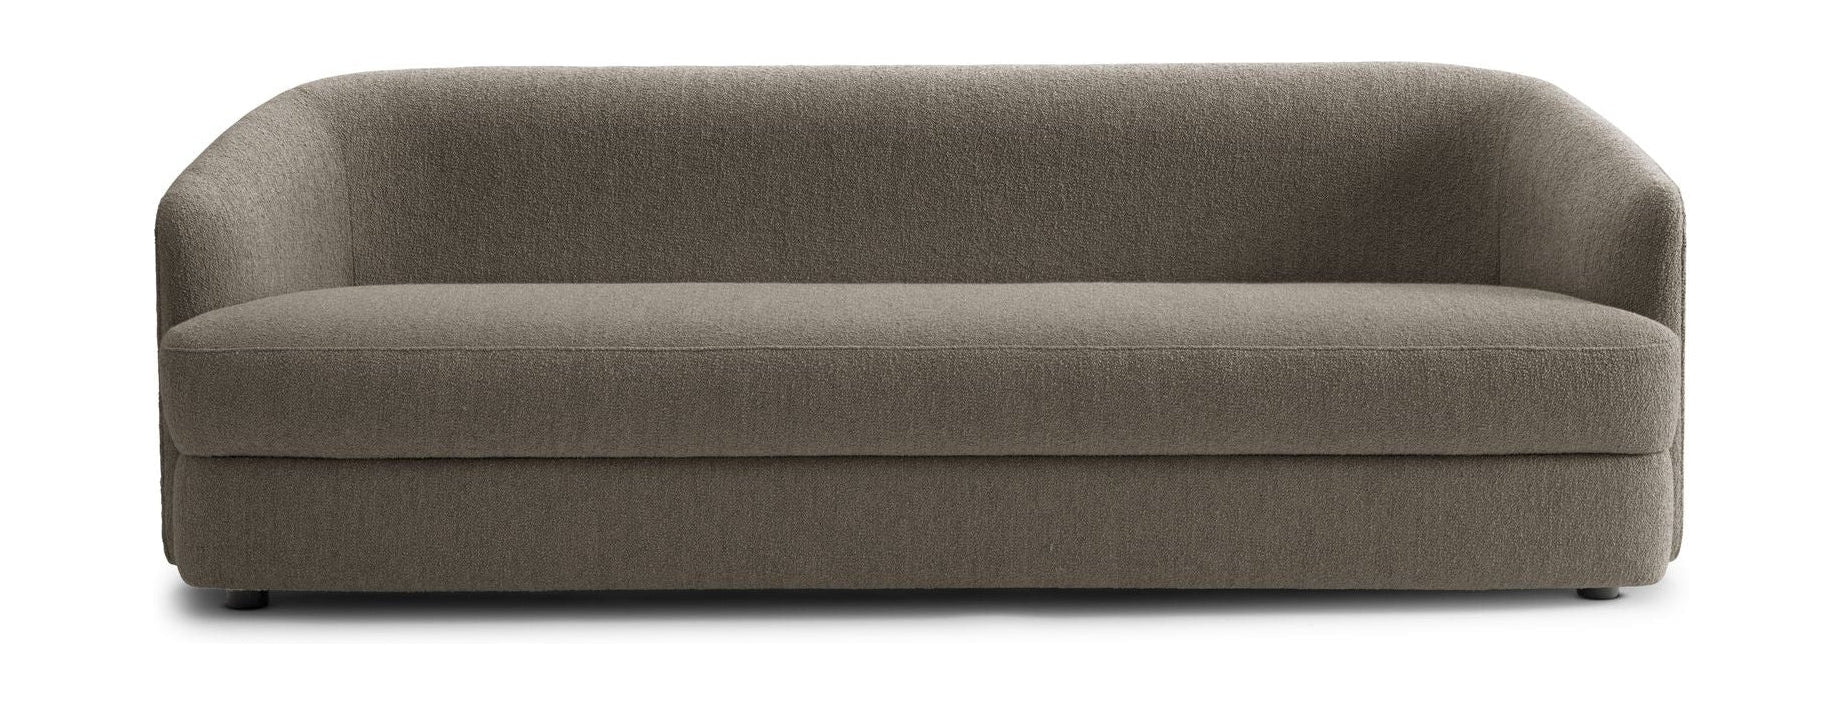 New Works Covent soffa 3 -sits, mörk taupe